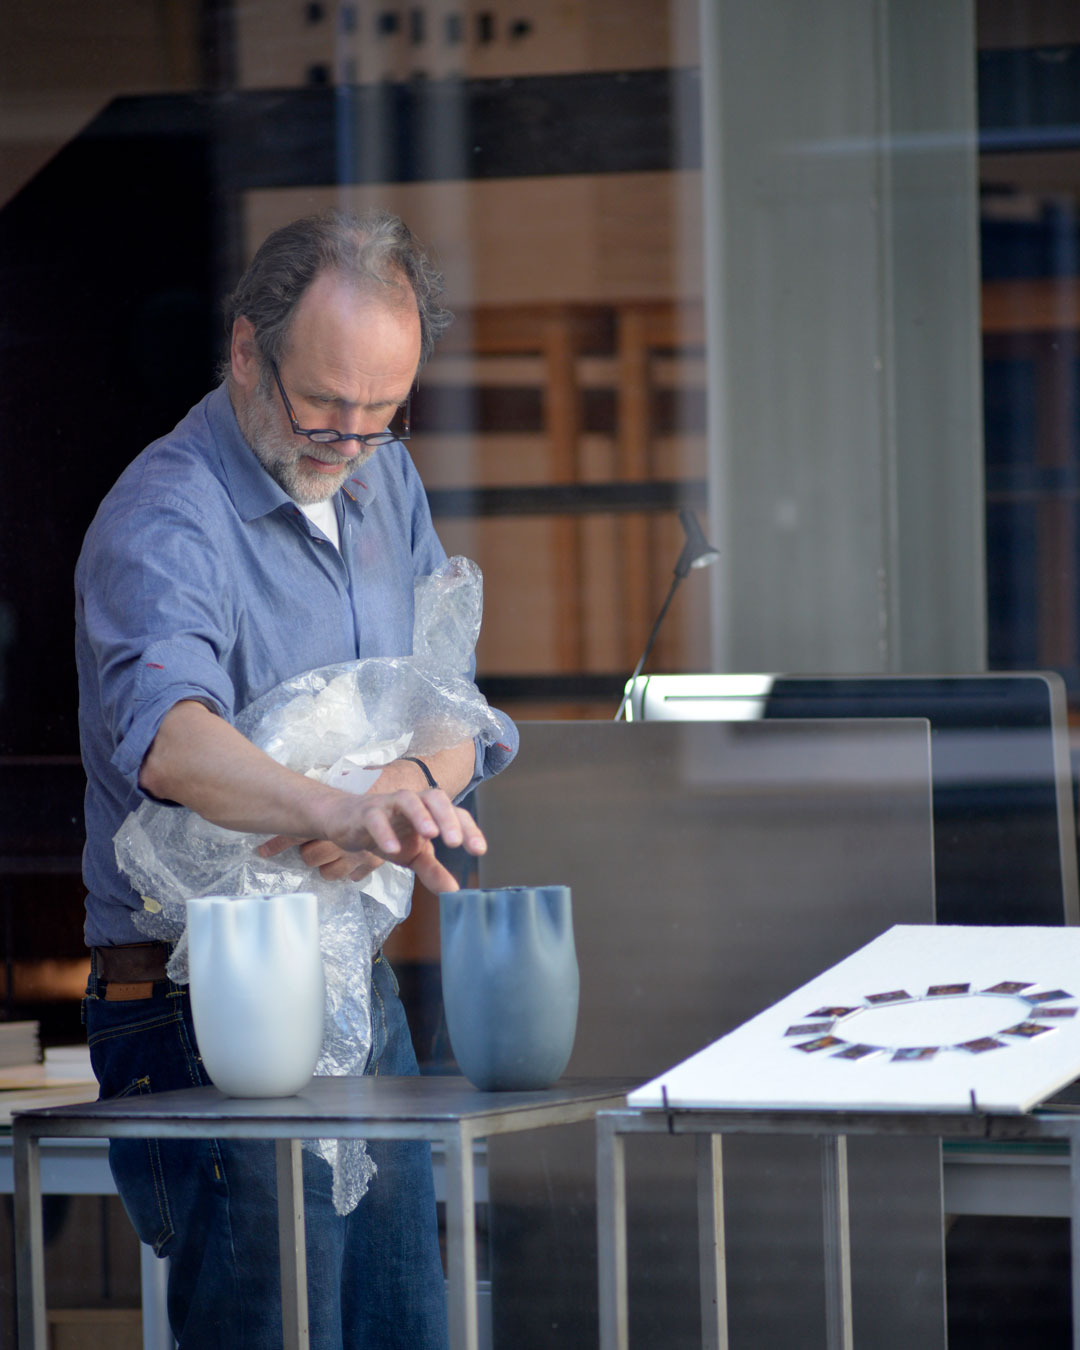 Herman Hermsen setting up his exhibition at Marzee in March 2019